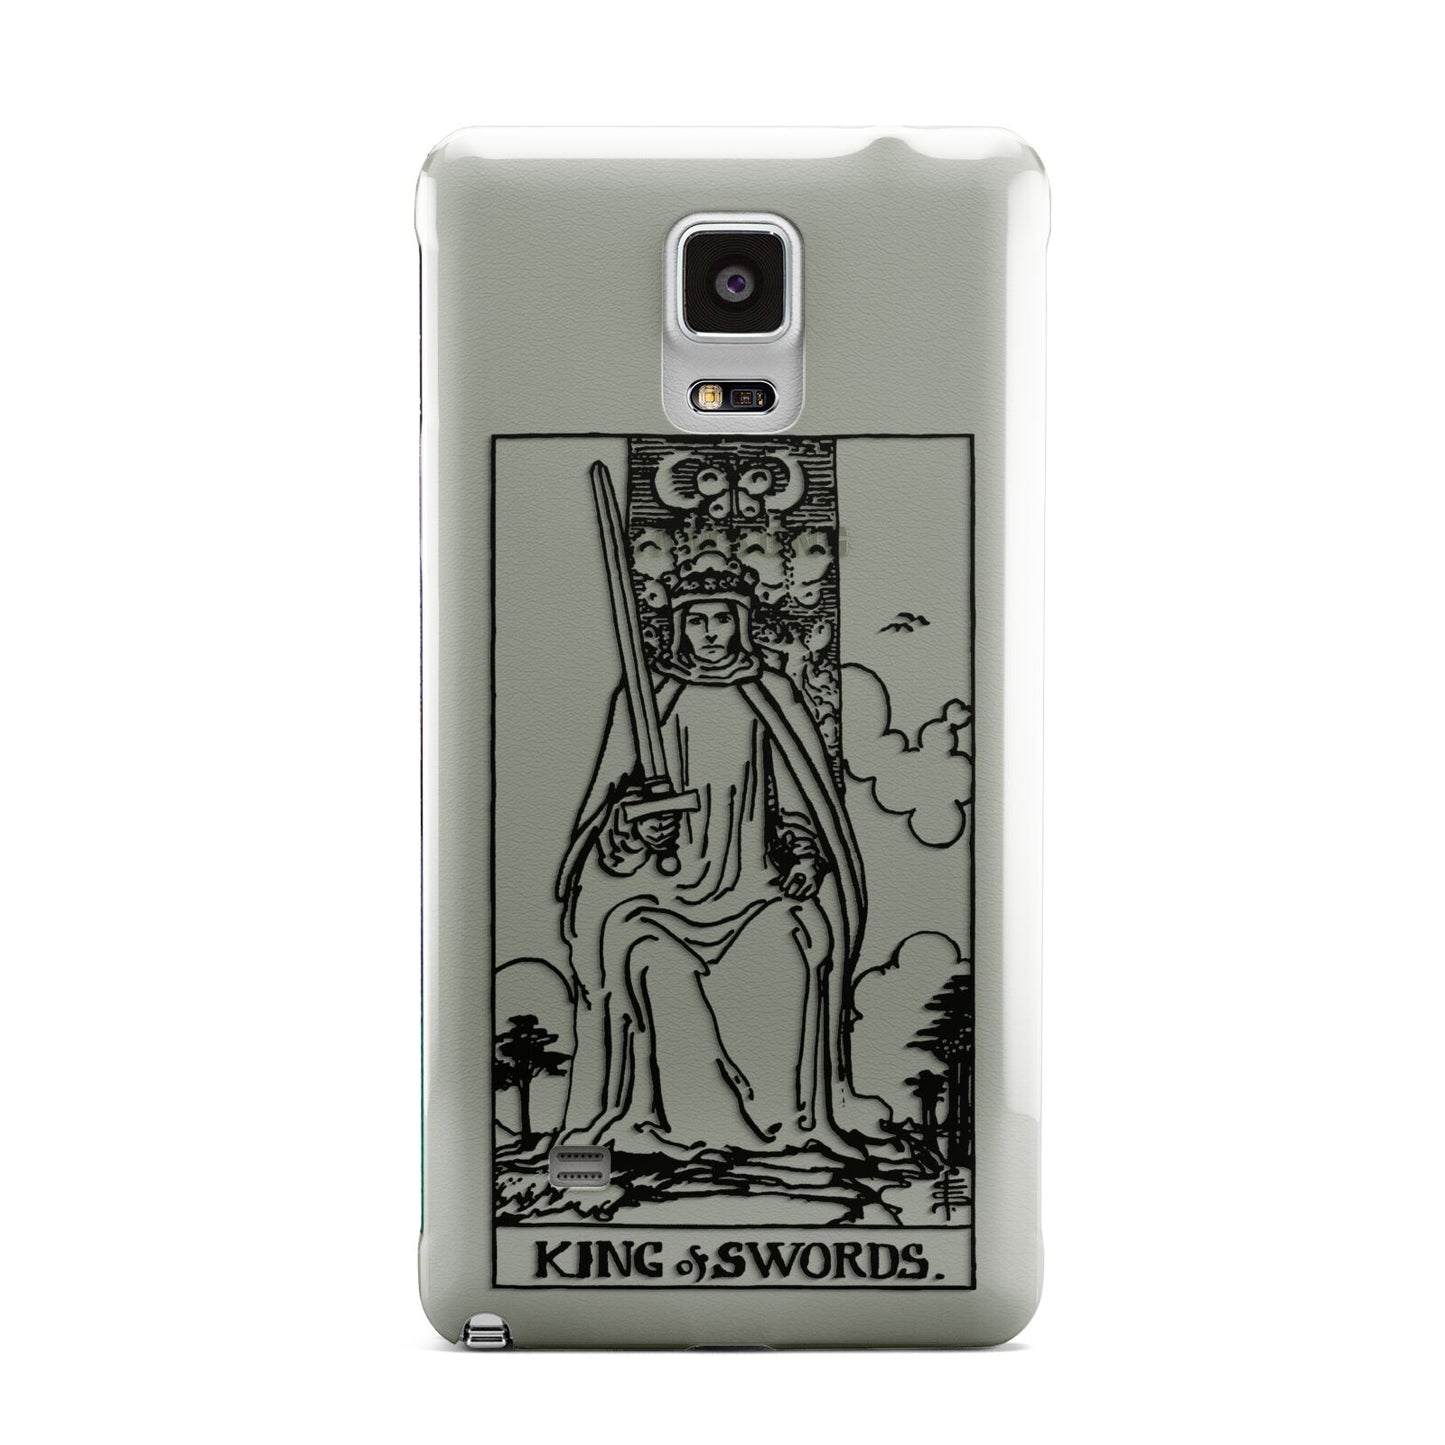 King of Swords Monochrome Samsung Galaxy Note 4 Case